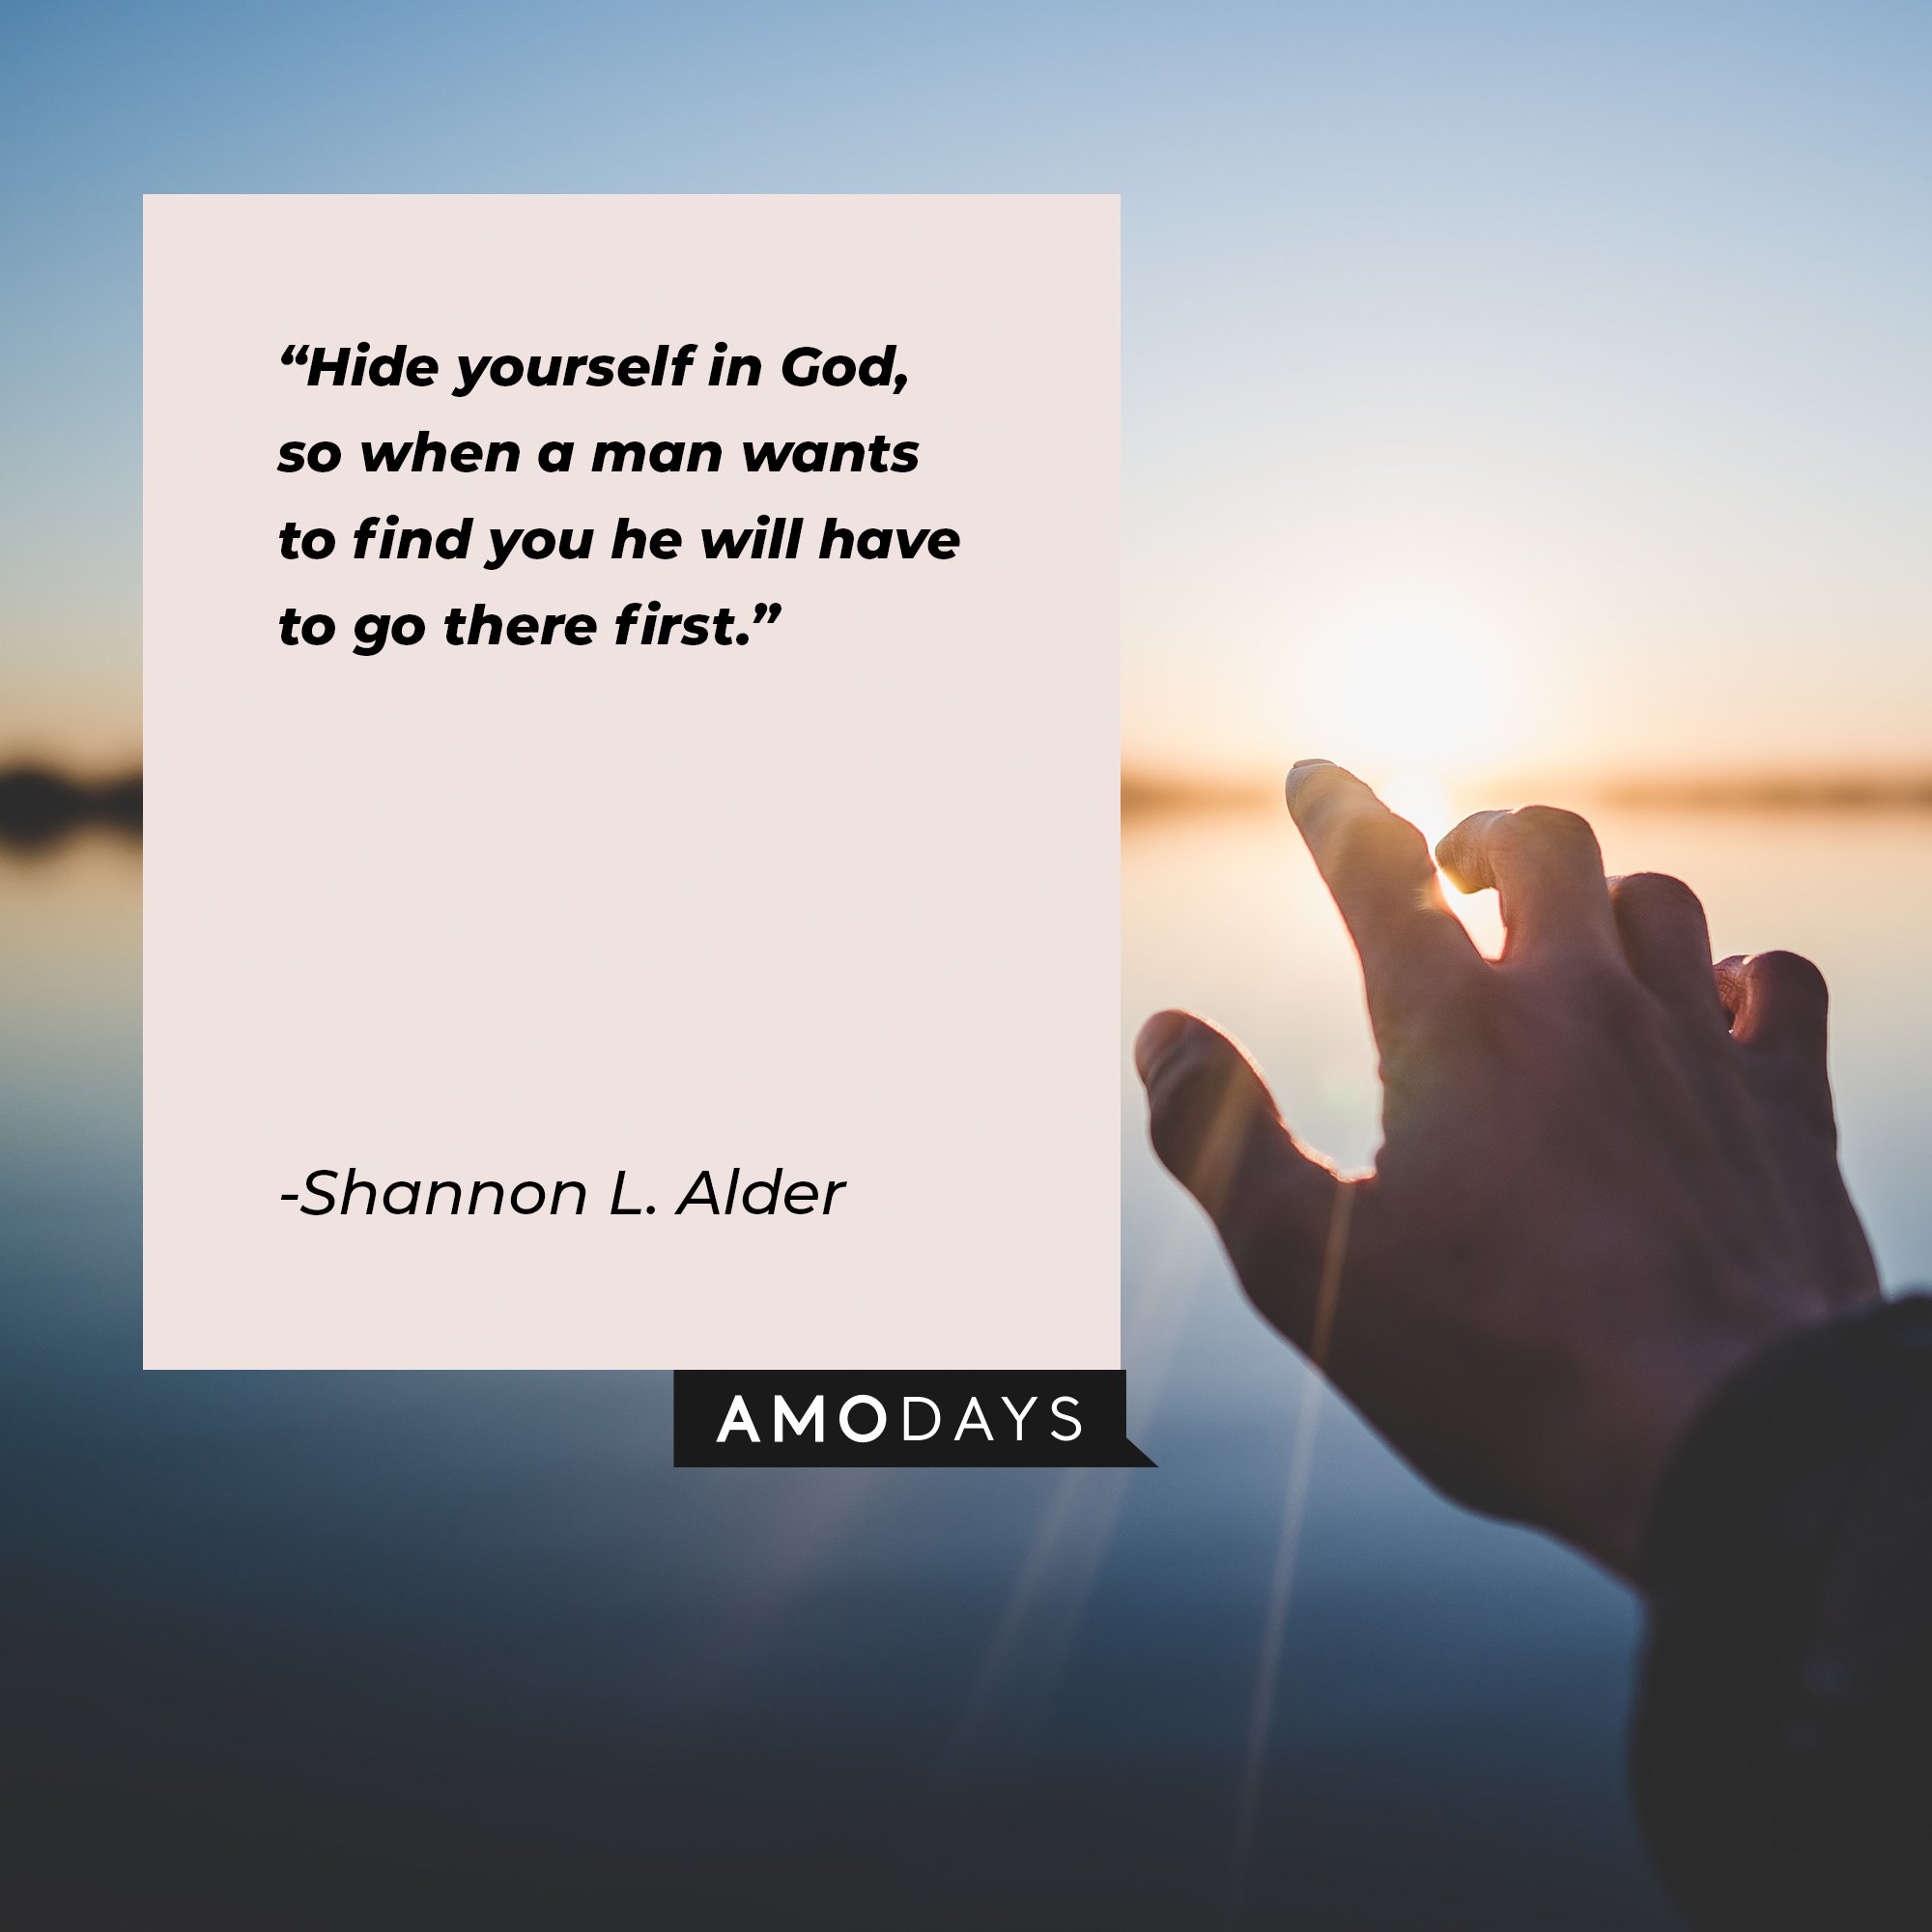 Shannon L. Alder's quote: “Hide yourself in God, so when a man wants to find you he will have to go there first.” | Image: AmoDays 